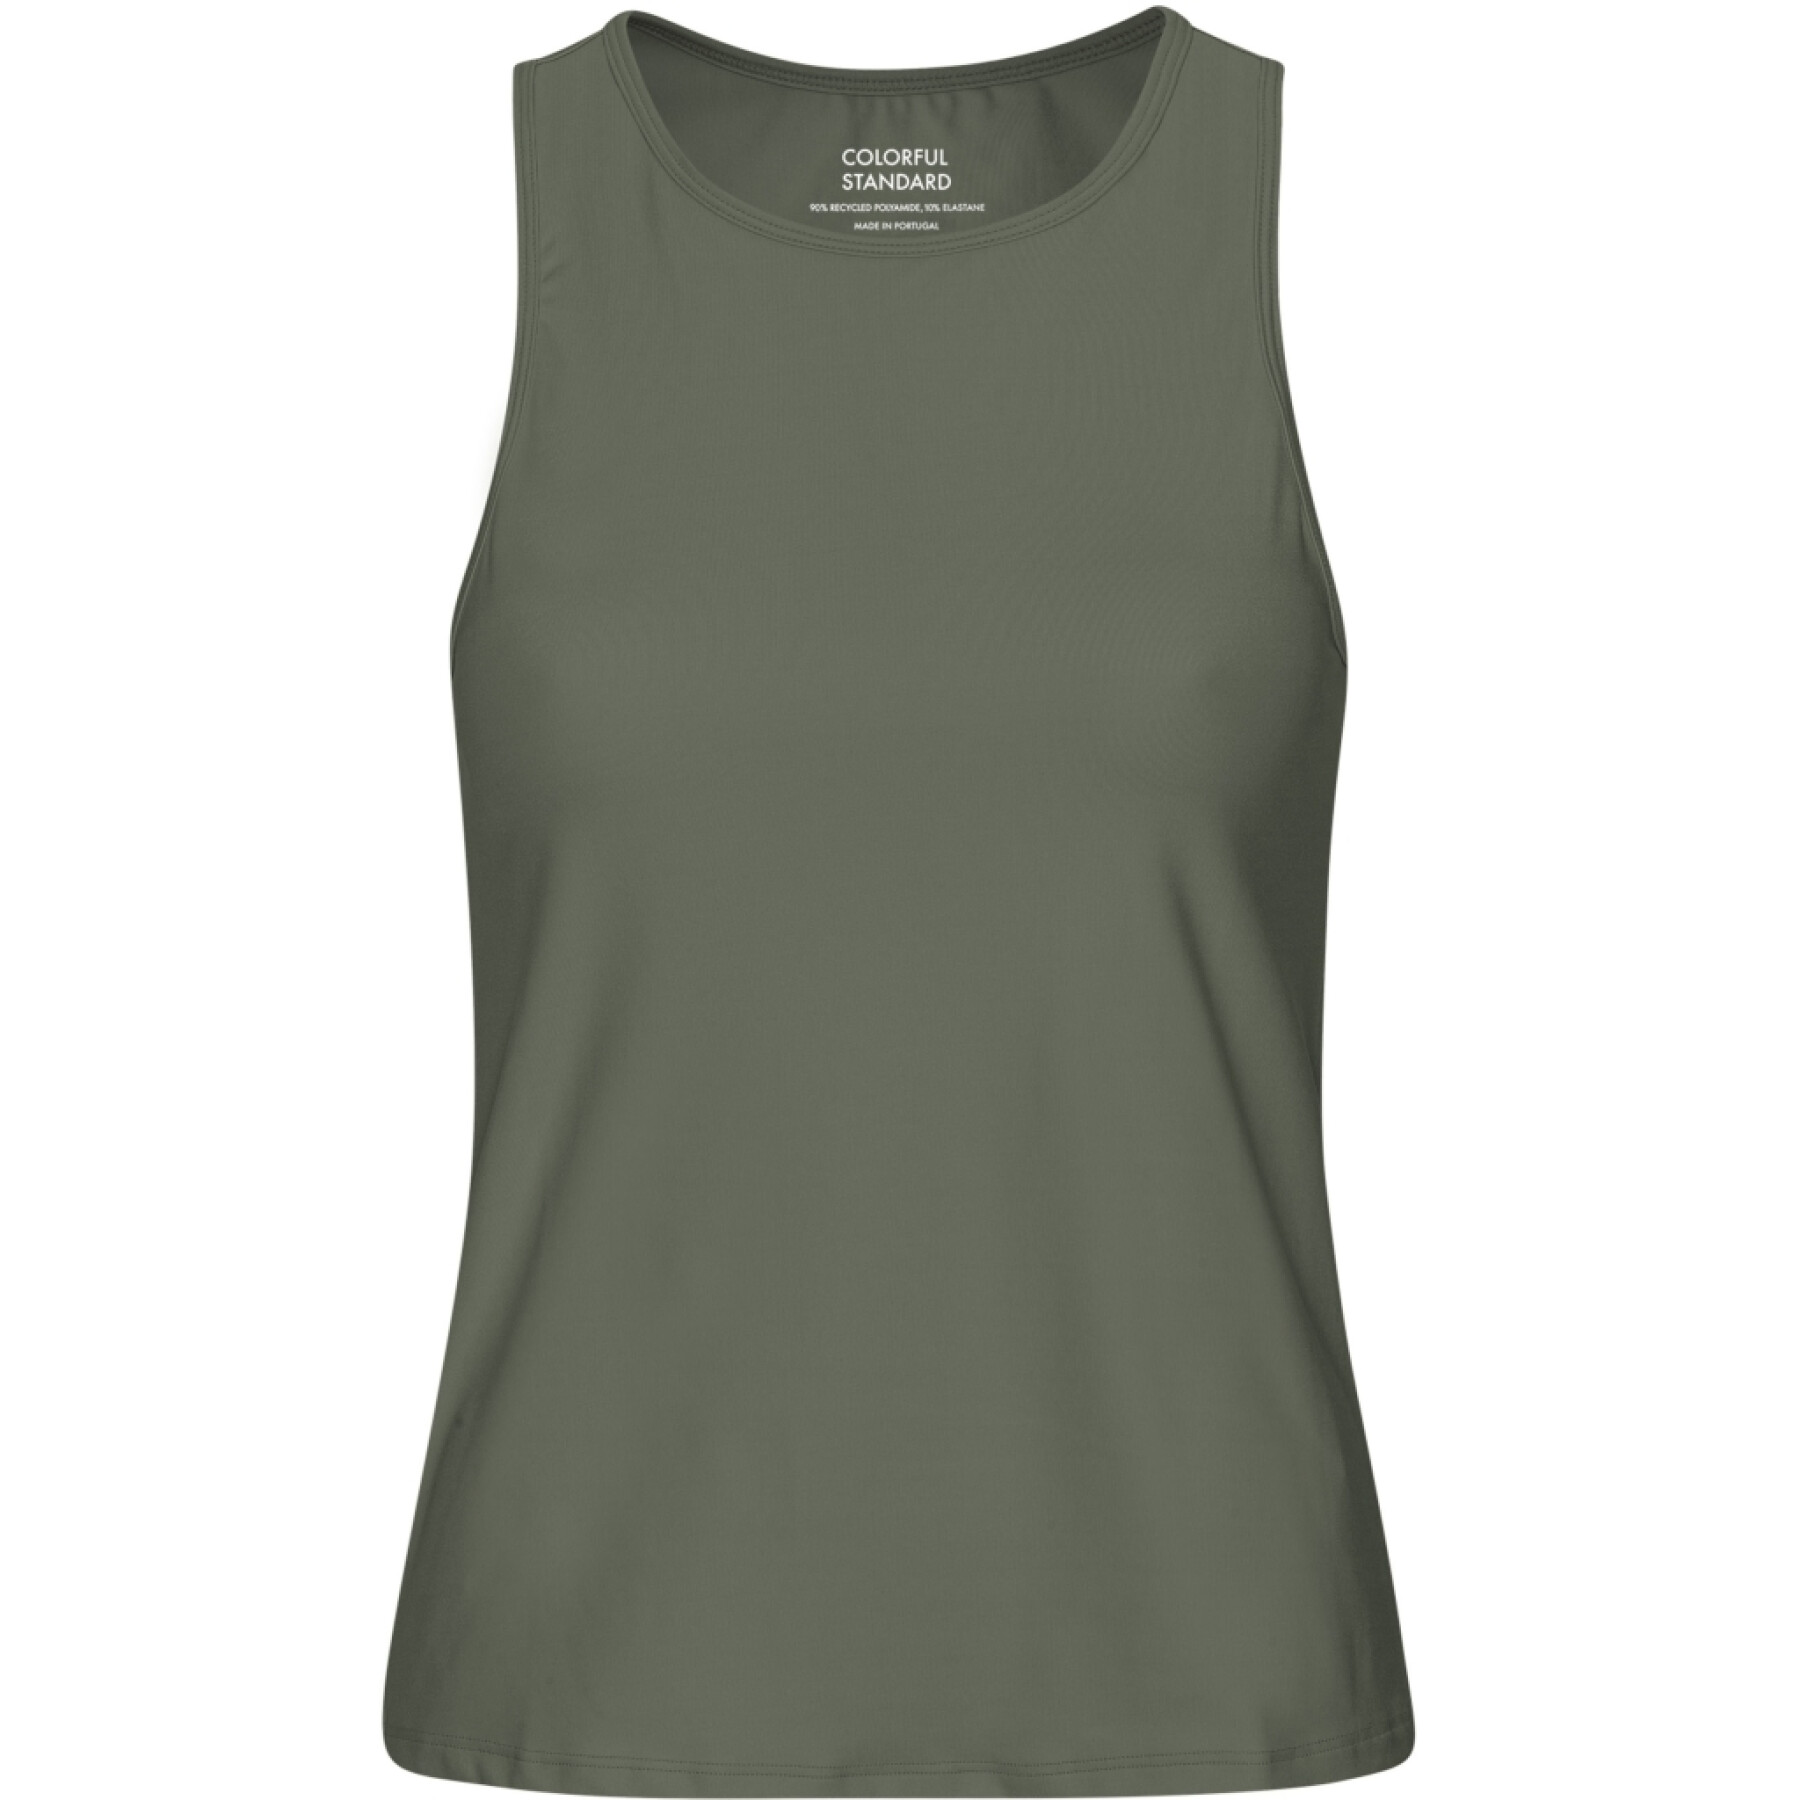 Damen-Top Colorful Standard Active Dusty Olive